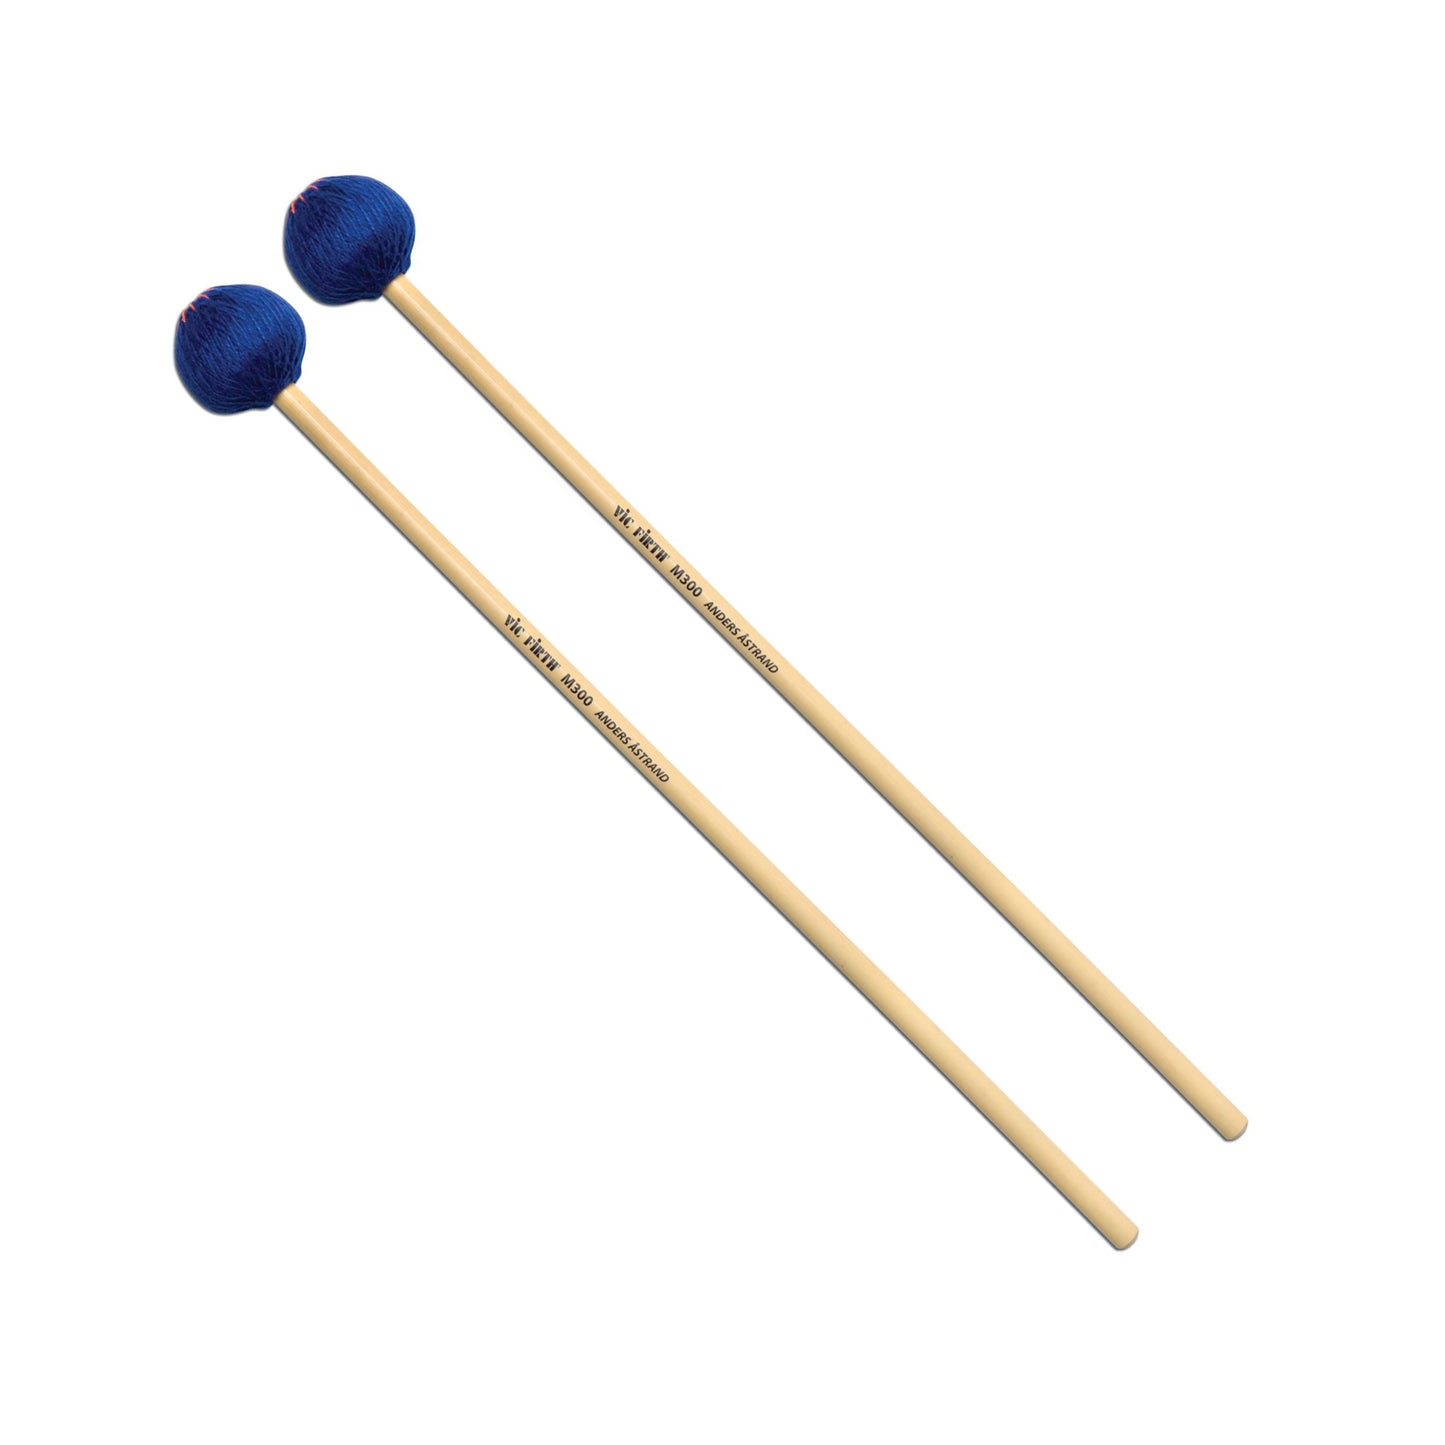 M300 - Anders Astrand Keyboard - Soft, Blue Mallets